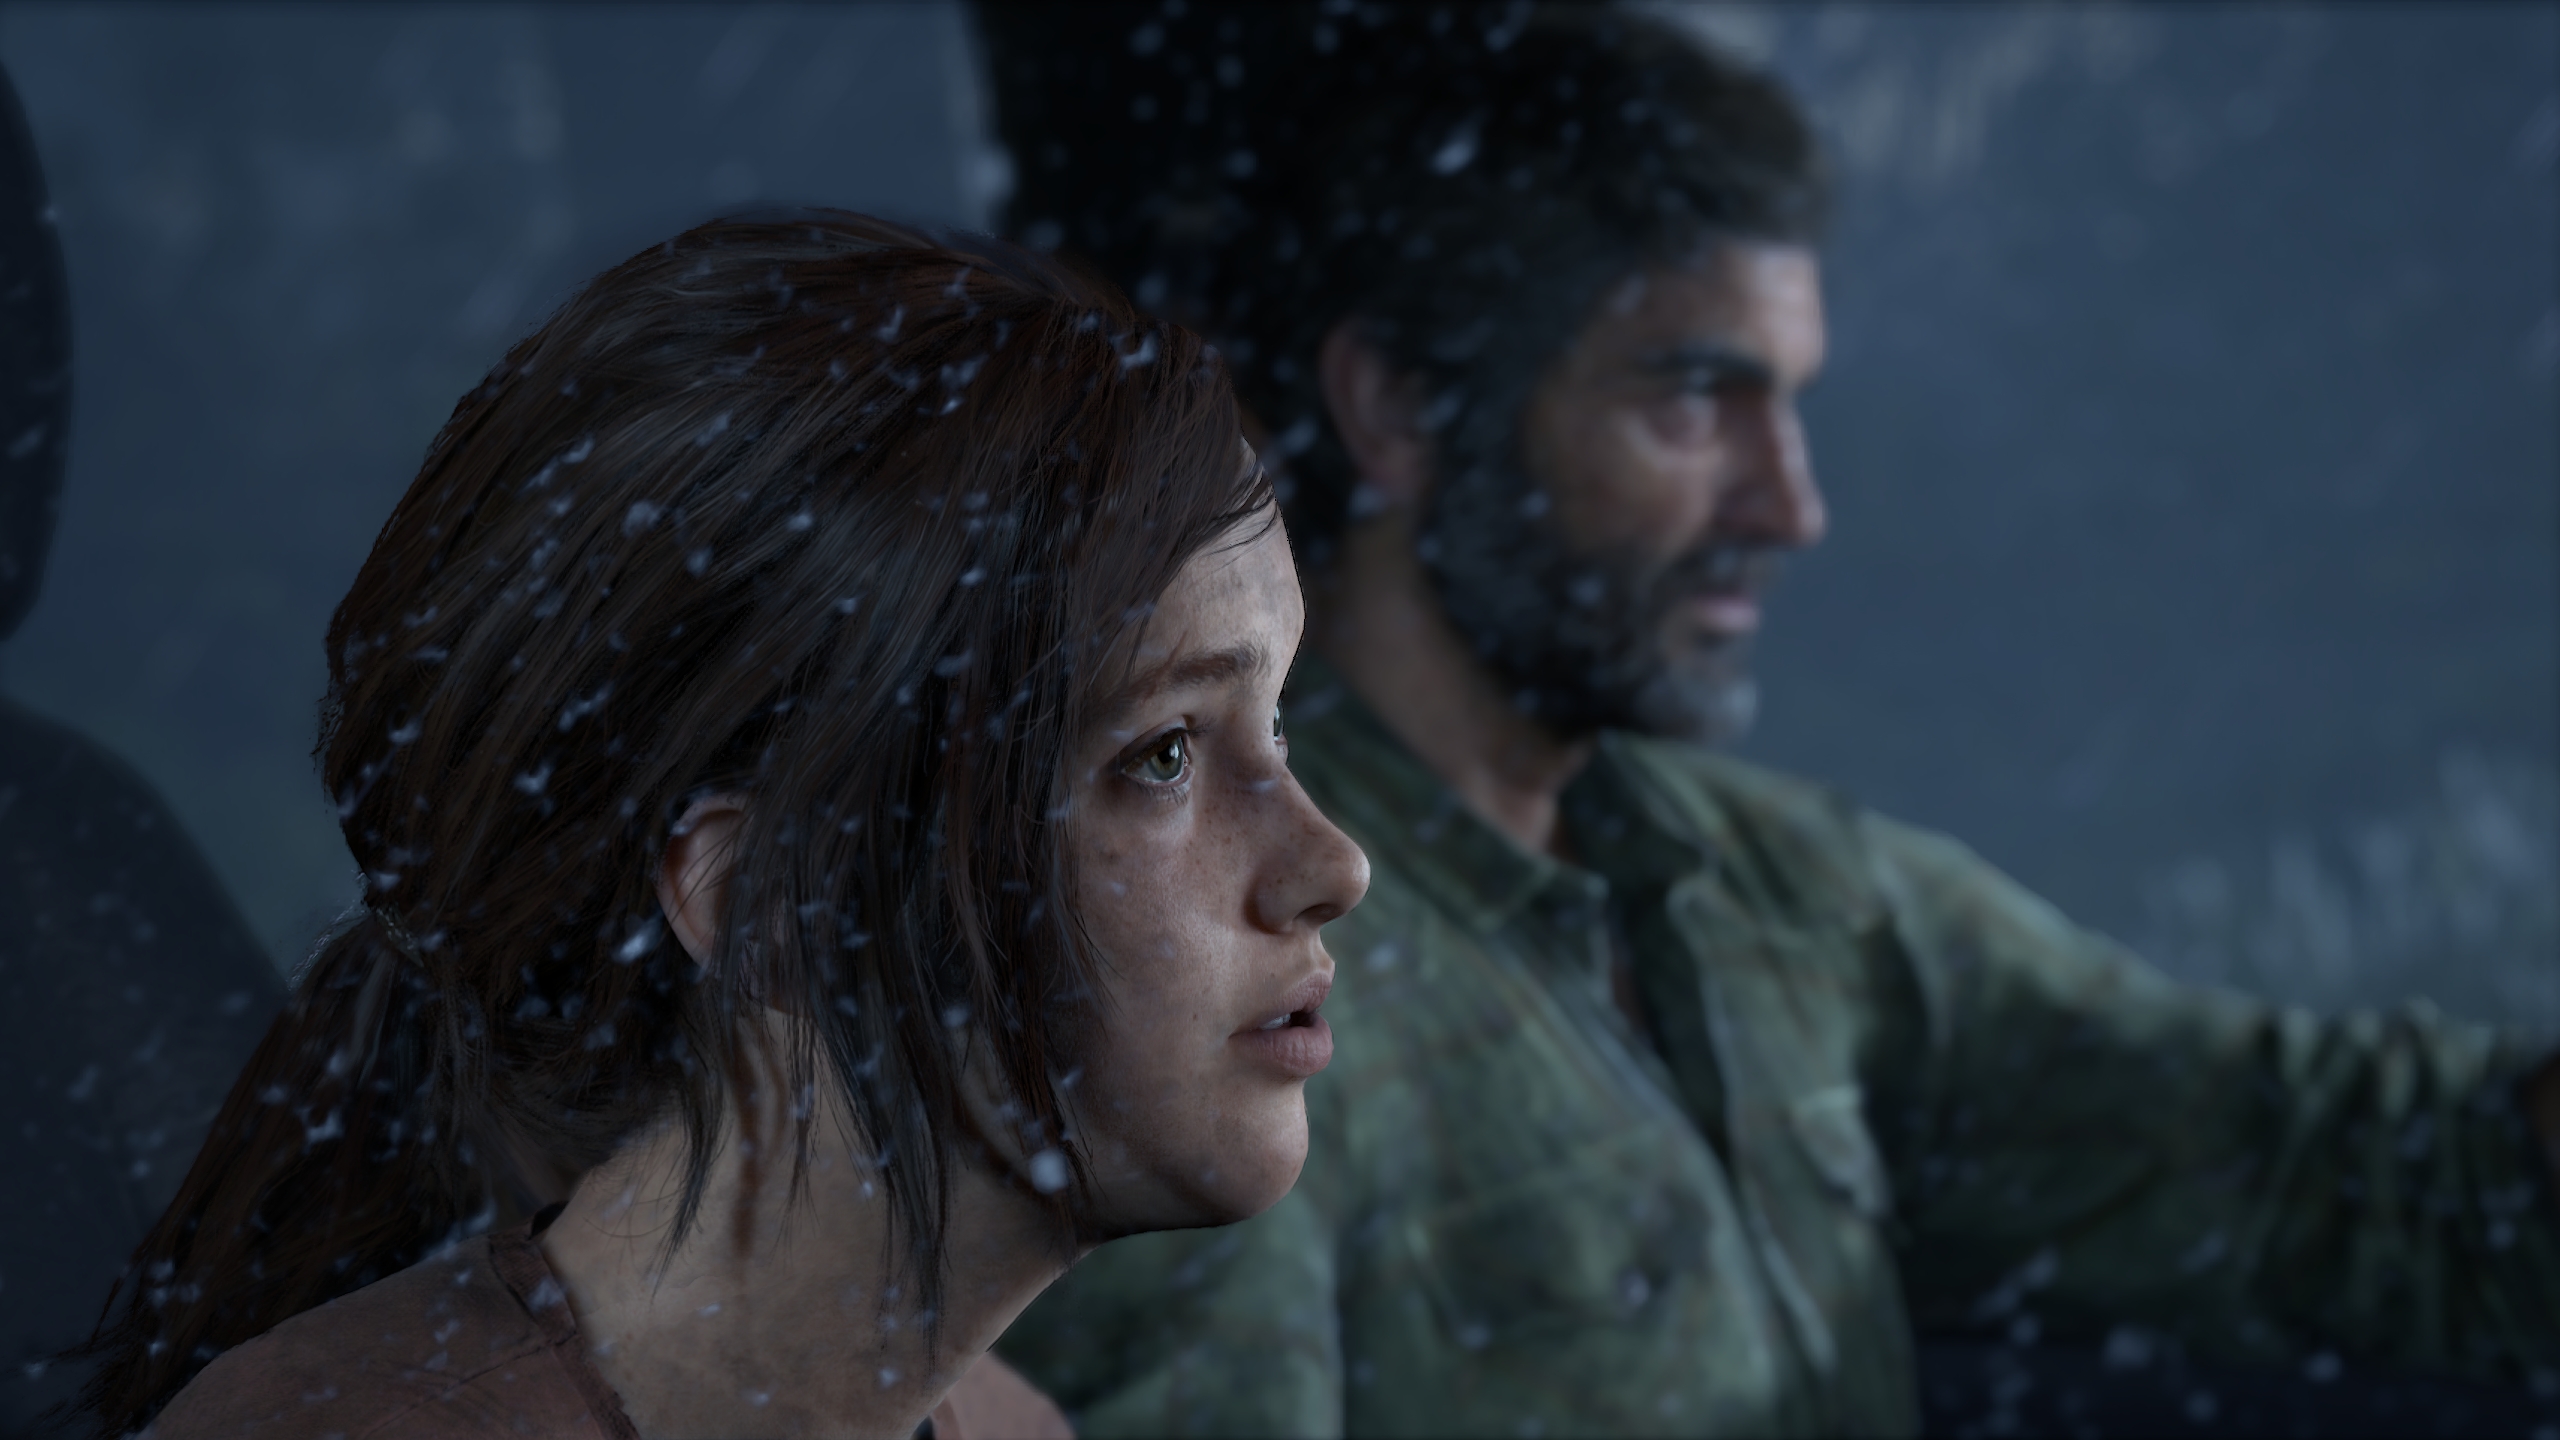 The Last of Us gets another hotfix, but the 'camera jitters' fix